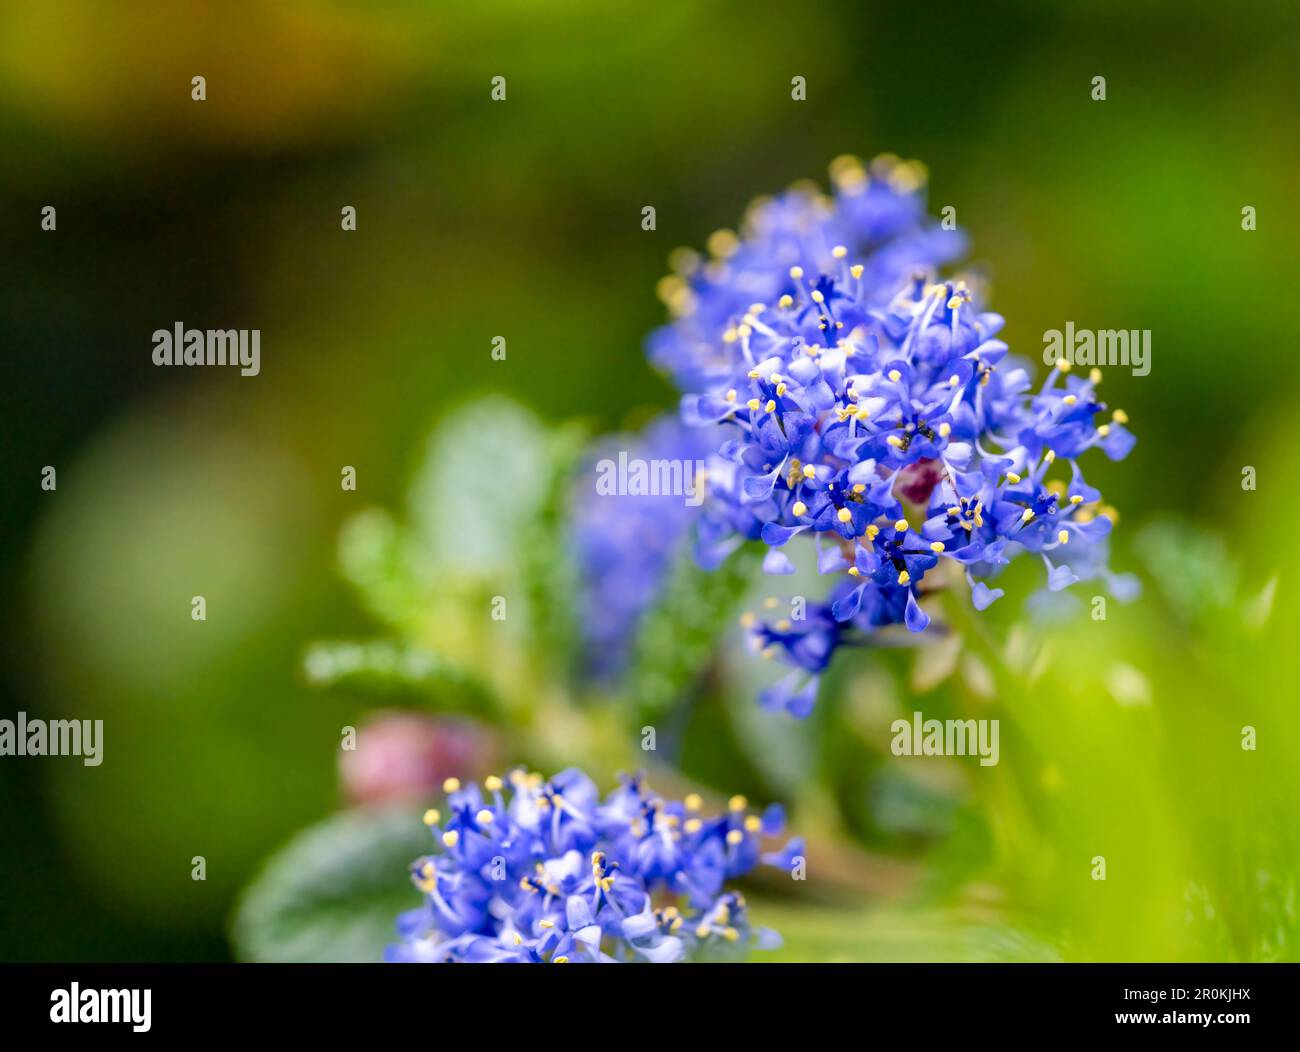 A blue Ceanothus flower photographed against a soft green background Stock Photo